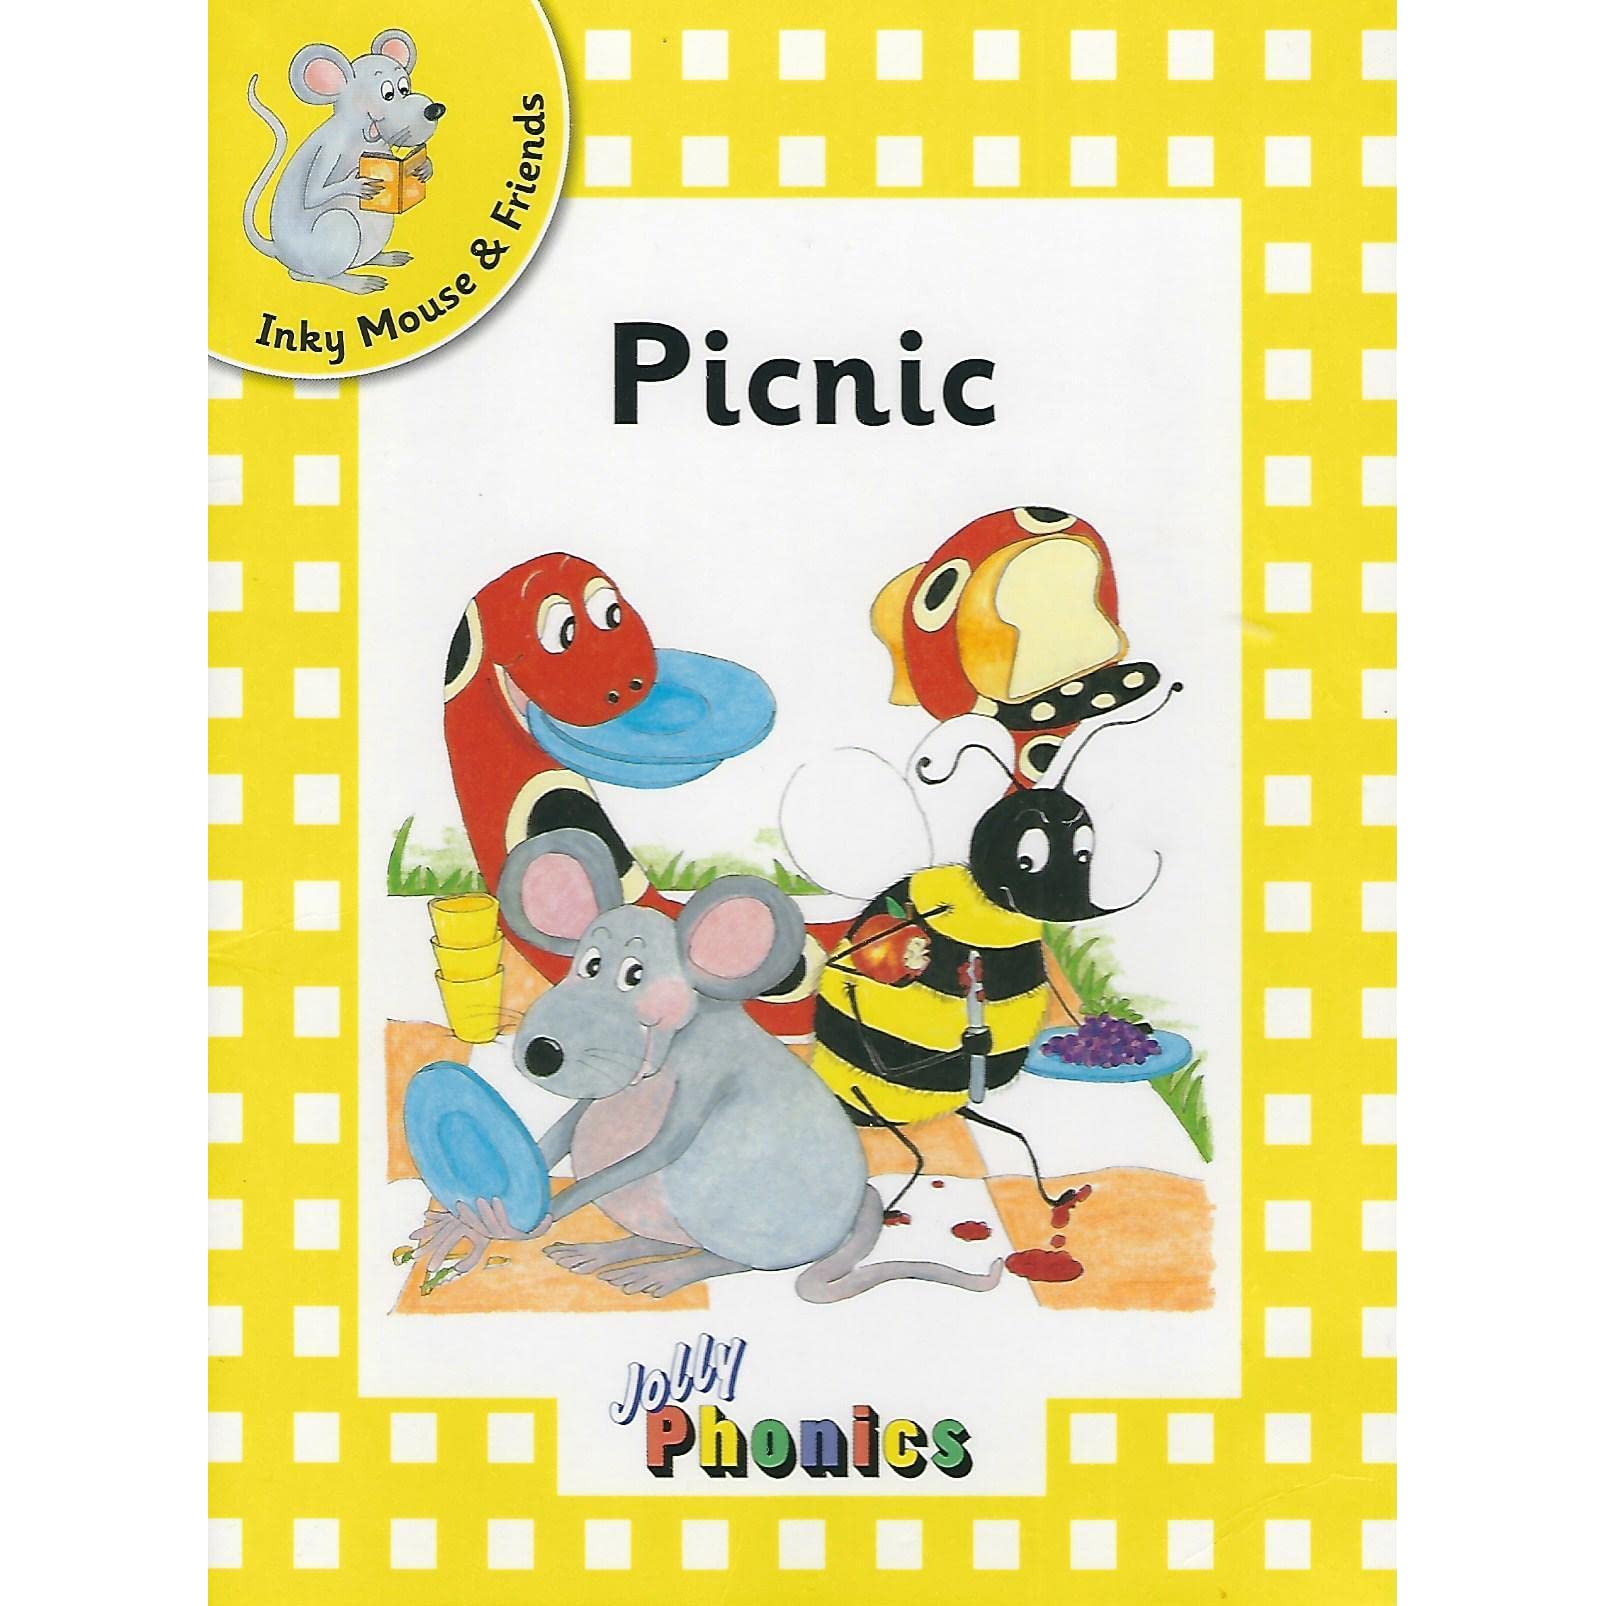 Picnic - Level 2 - Inky Mouse & Friends(Jolly Phonics)